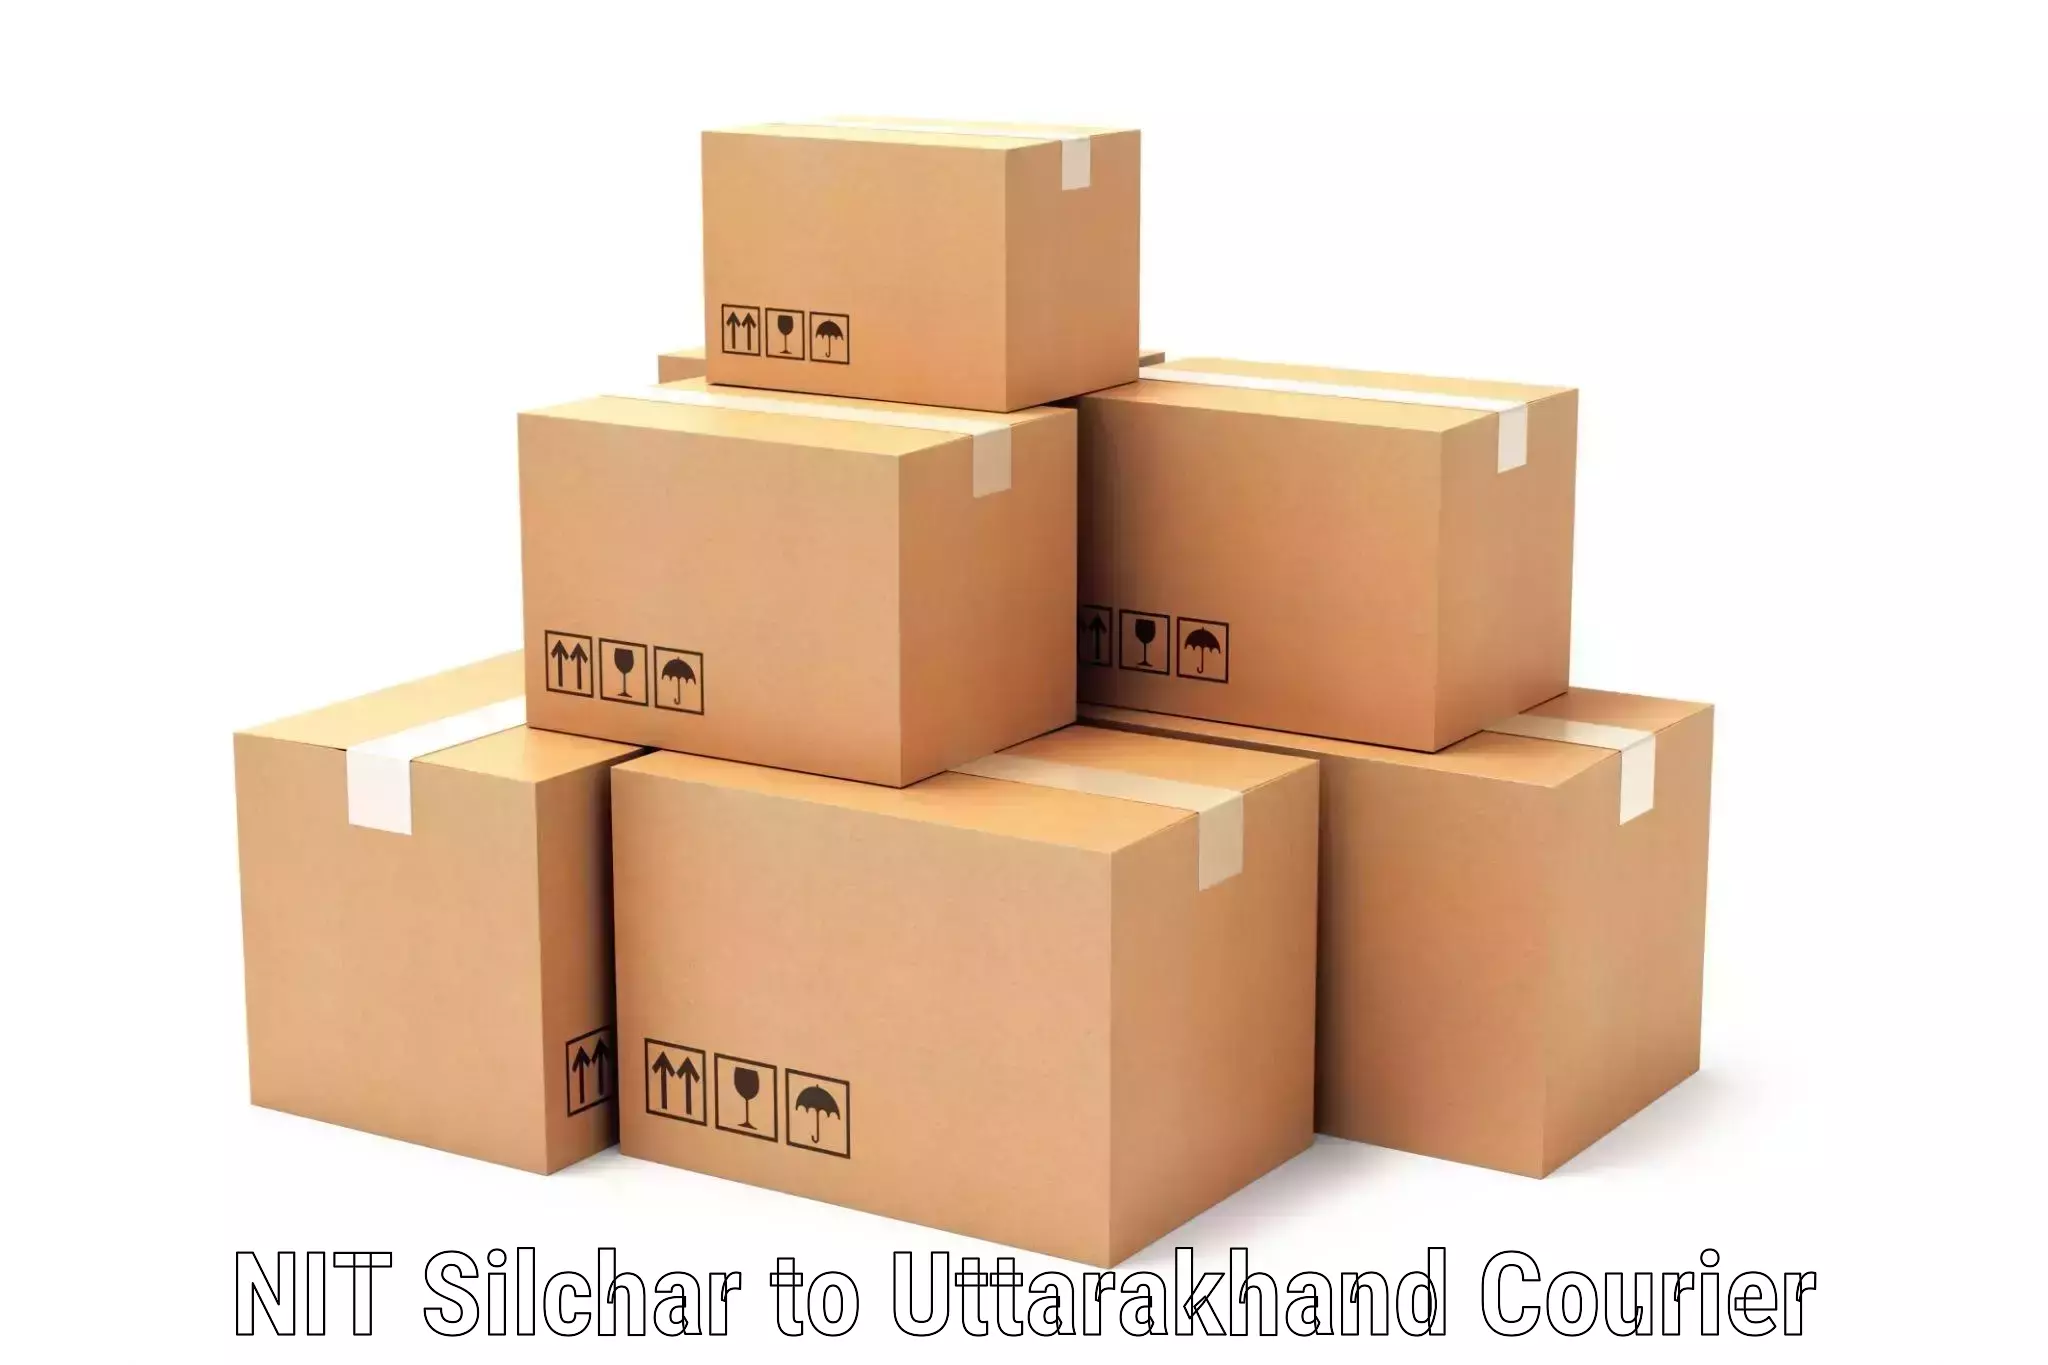 Easy access courier services NIT Silchar to Almora